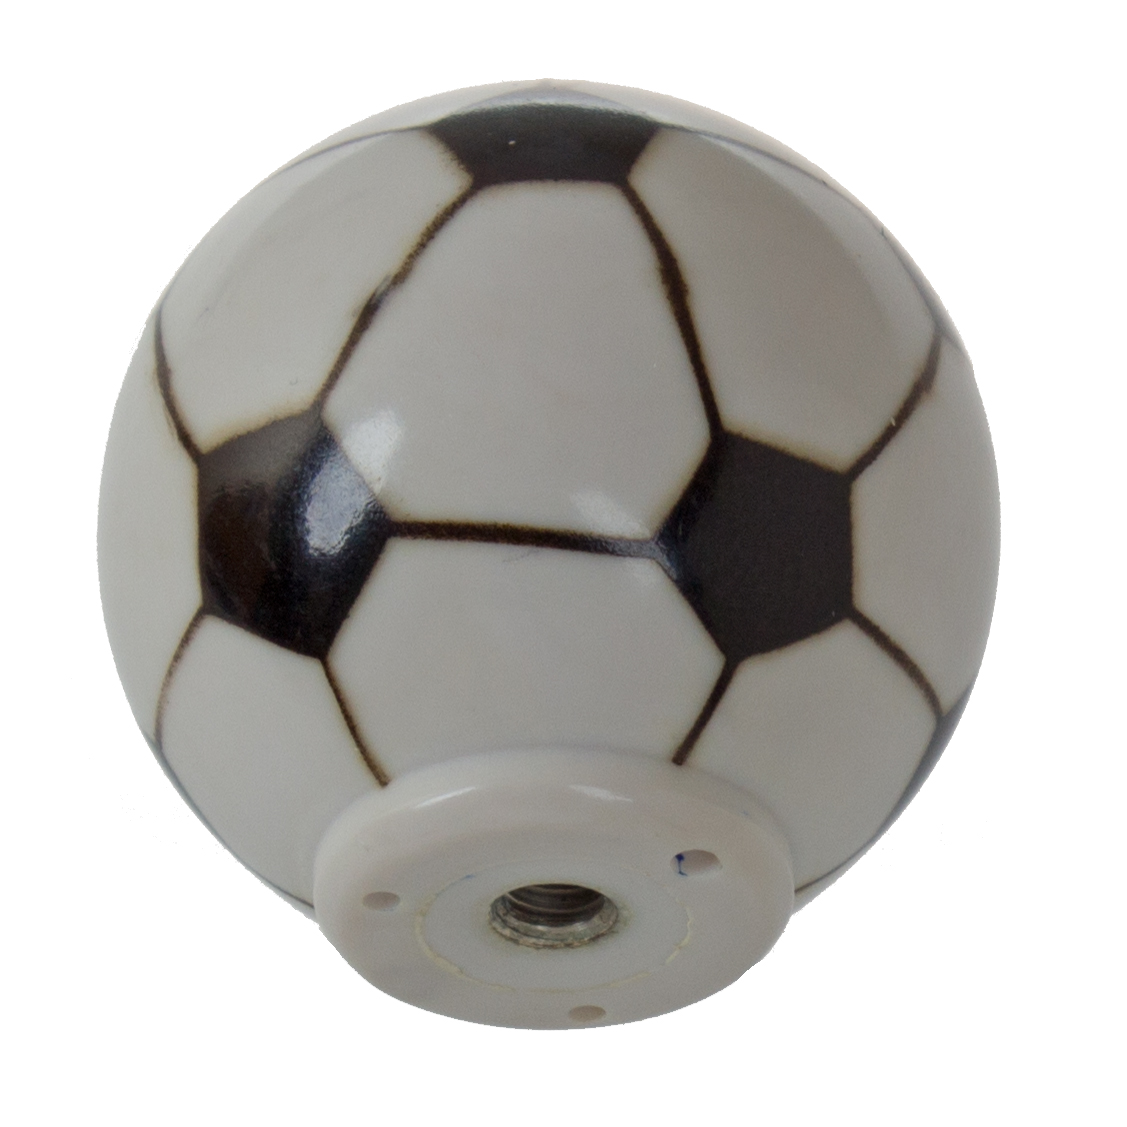 GlideRite 1-1/4 in. Soccer Ball Sports Dresser Drawer Cabinet Knobs, Pack of 25 - image 2 of 4